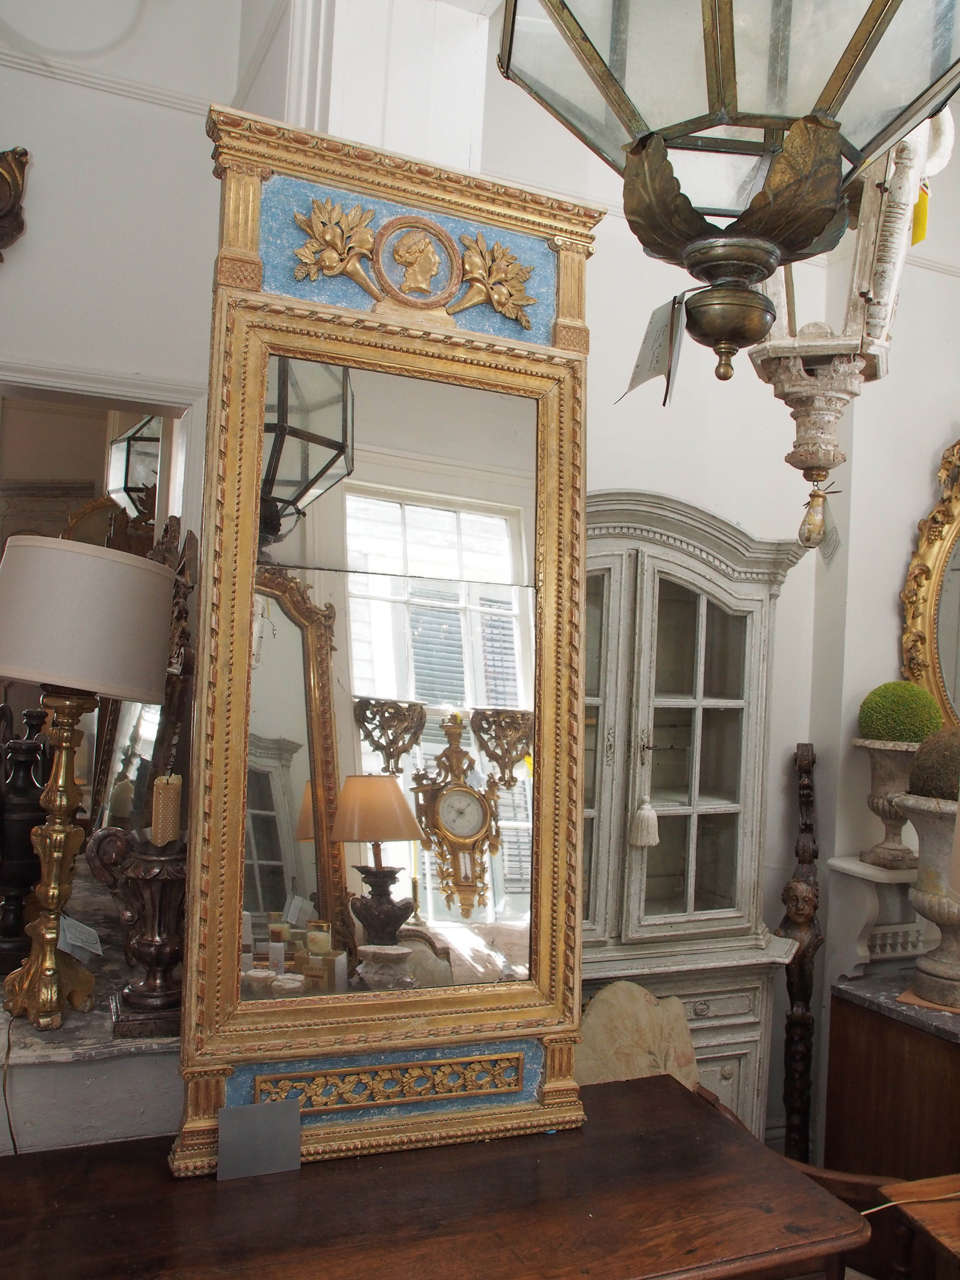 18th century period Swedish trumeau mirror with top center medallion carving of a man's face. Some refreshed paint.